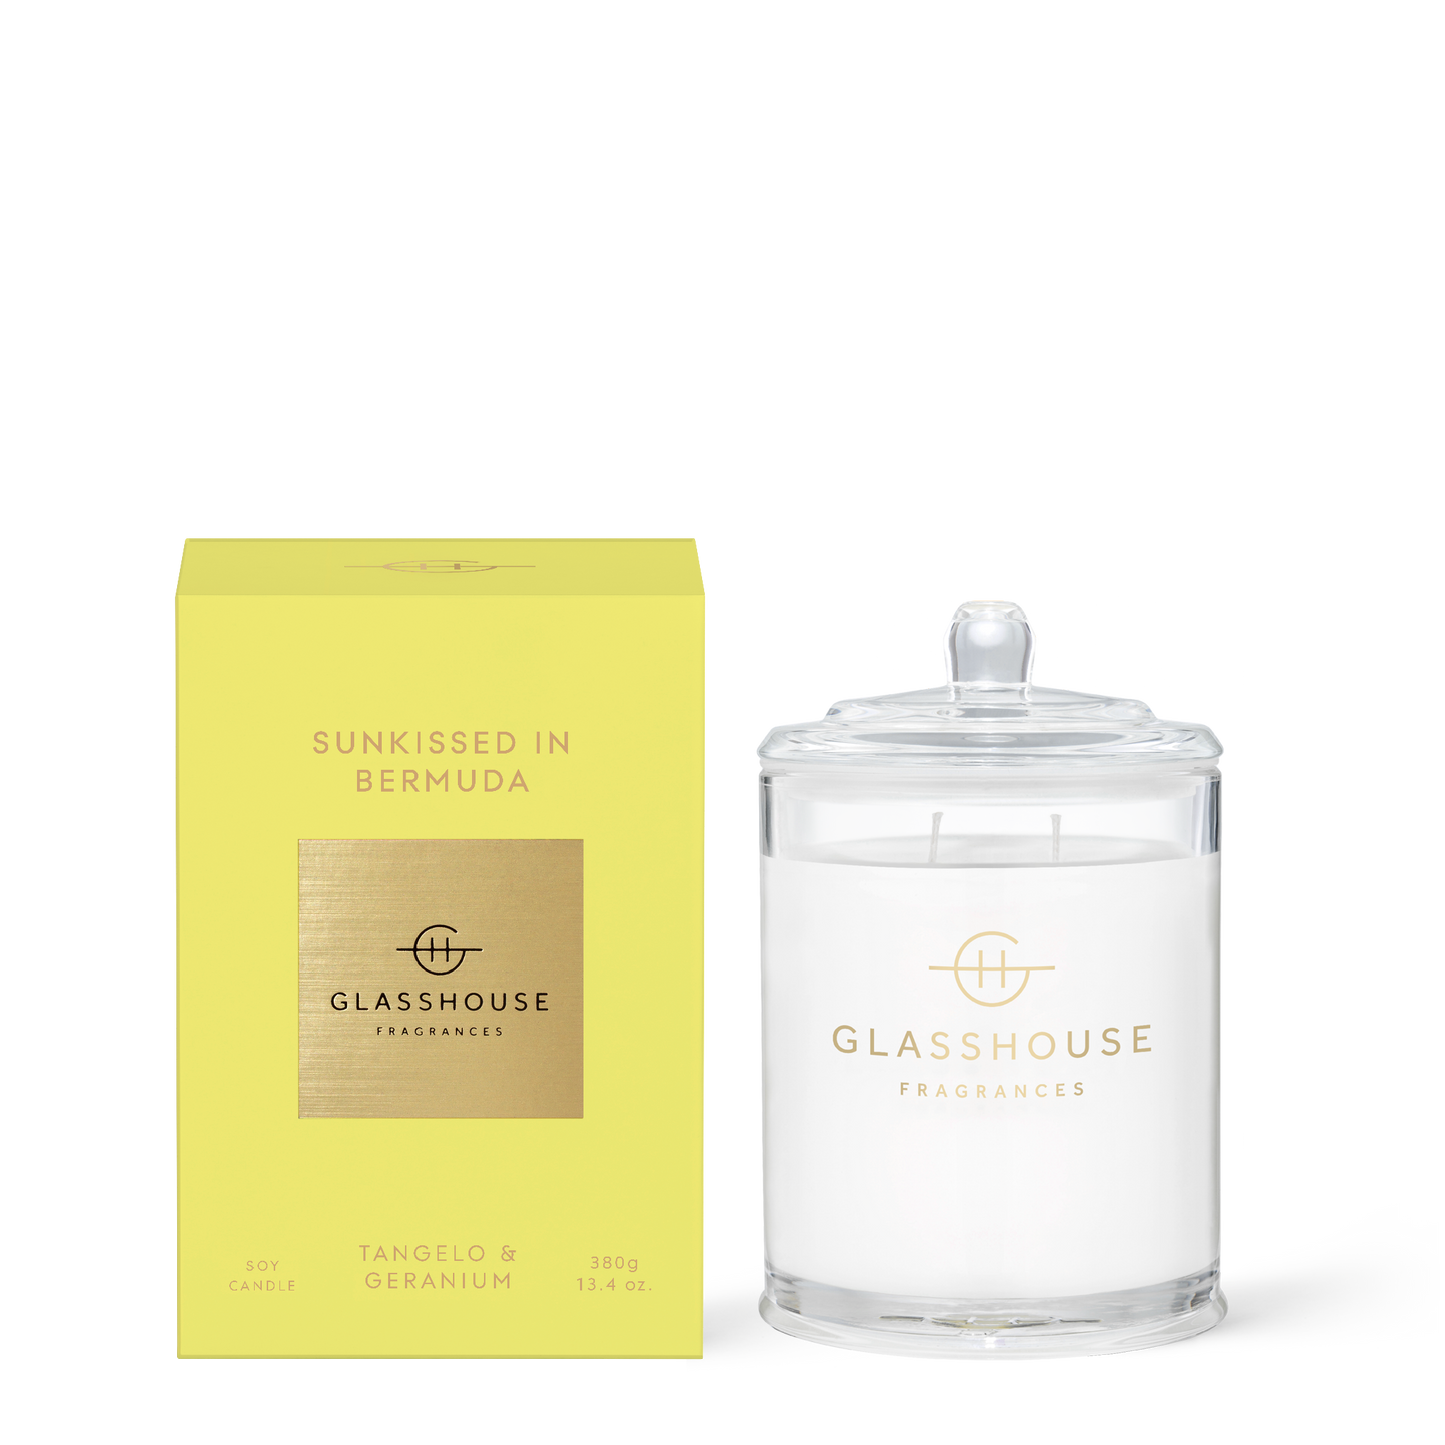 13.4 oz Candle - Sunkissed in Bermuda